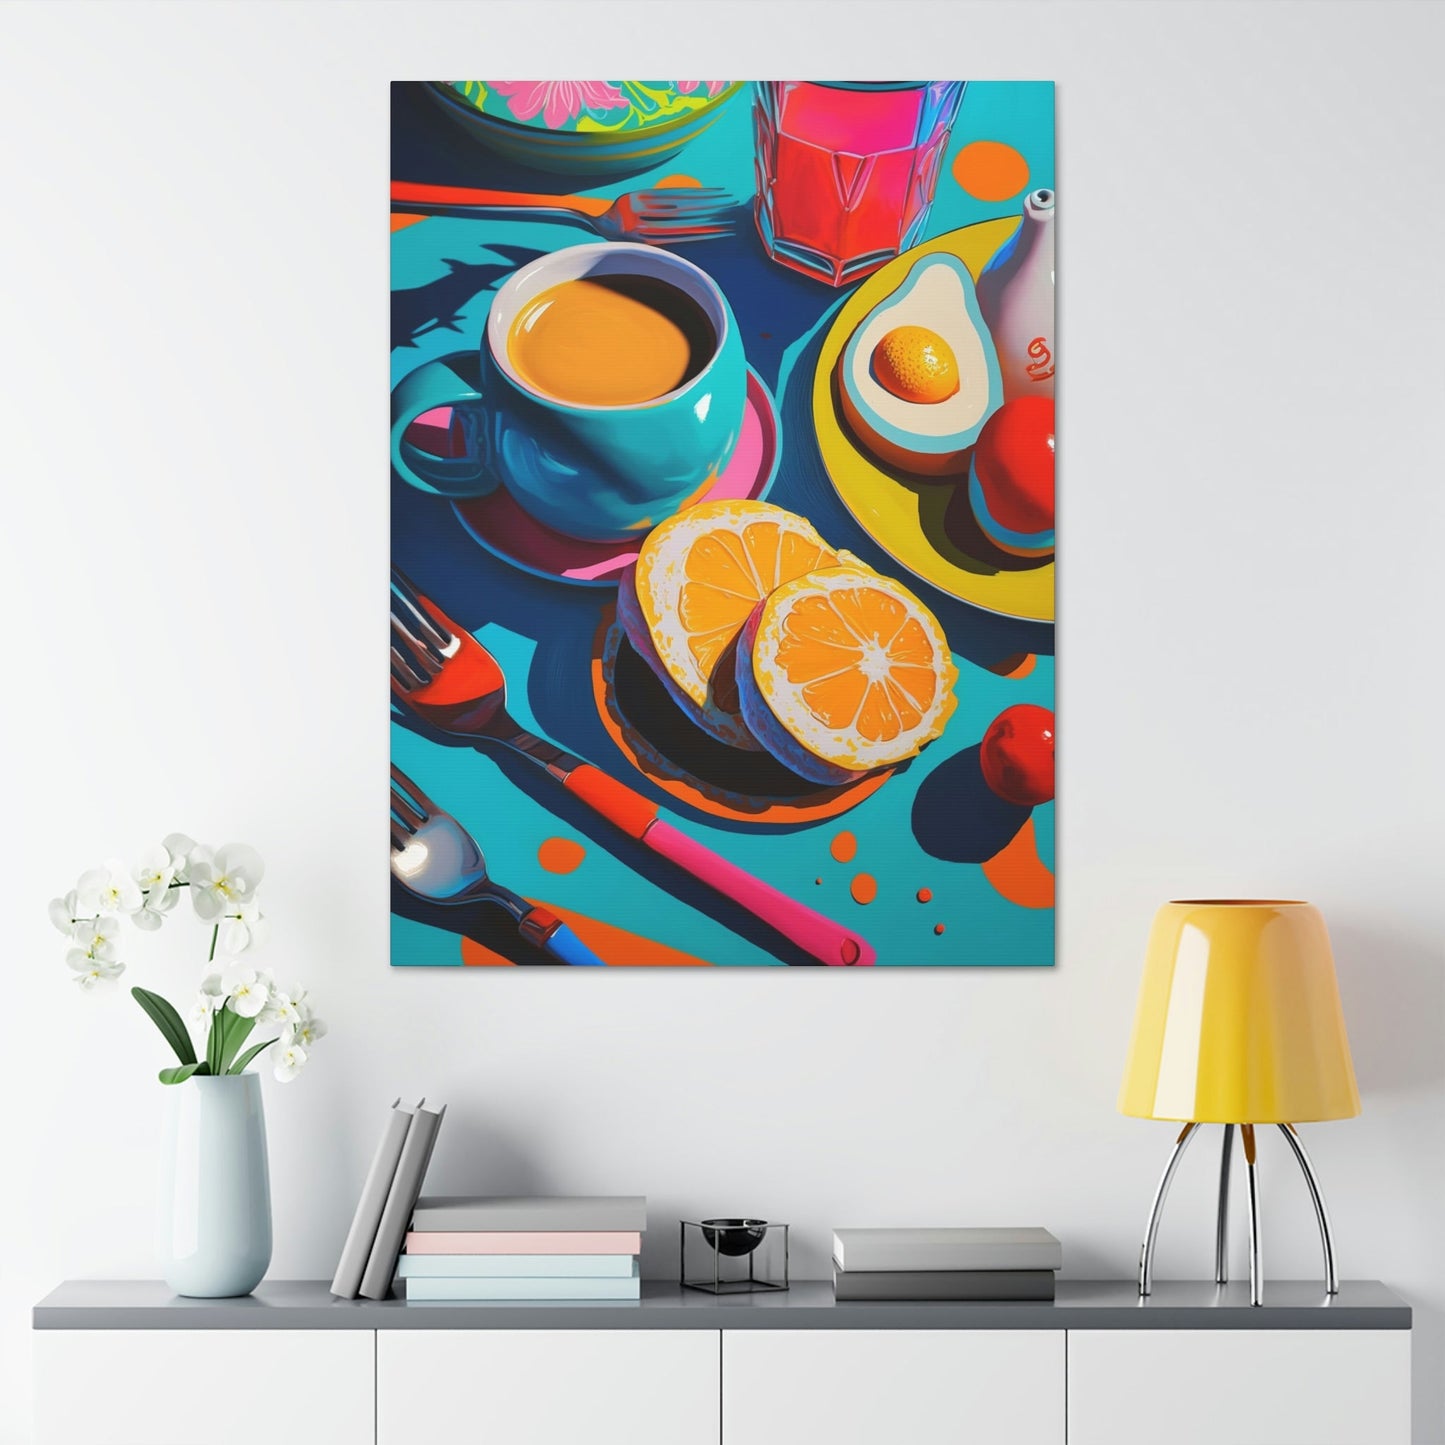 Morning Delight: Poster of a Beautifully Served Breakfast Table